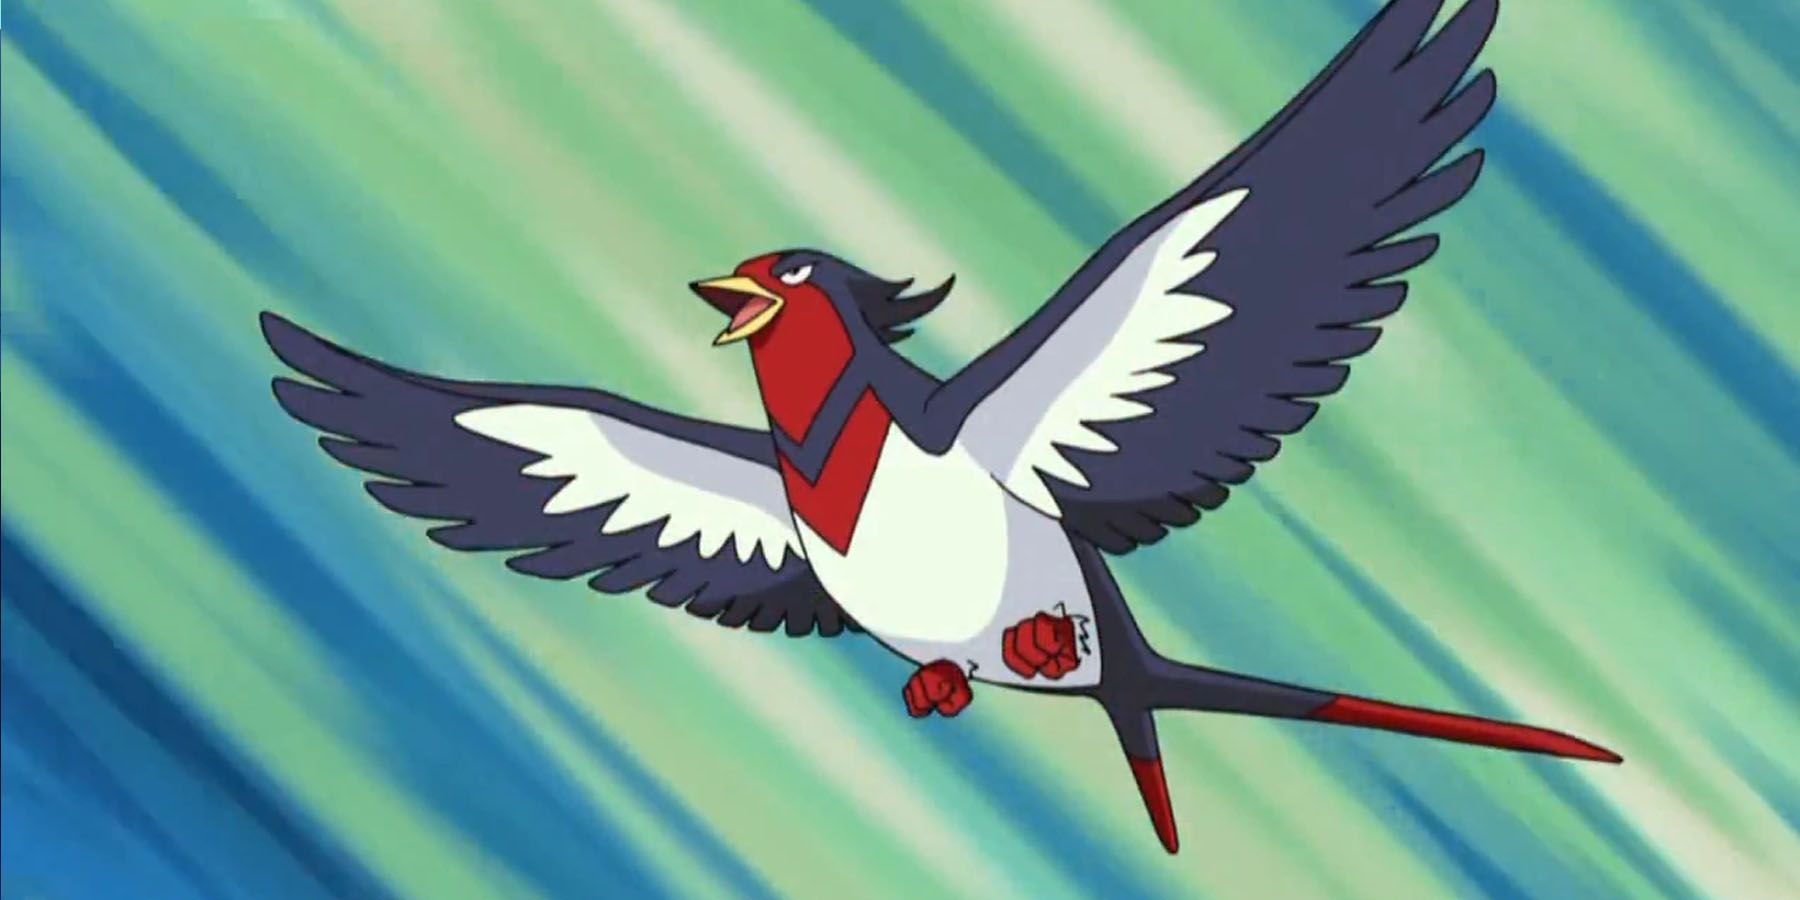 A screenshot of Swellow flying against a blue and green background in the Pokemon anime.